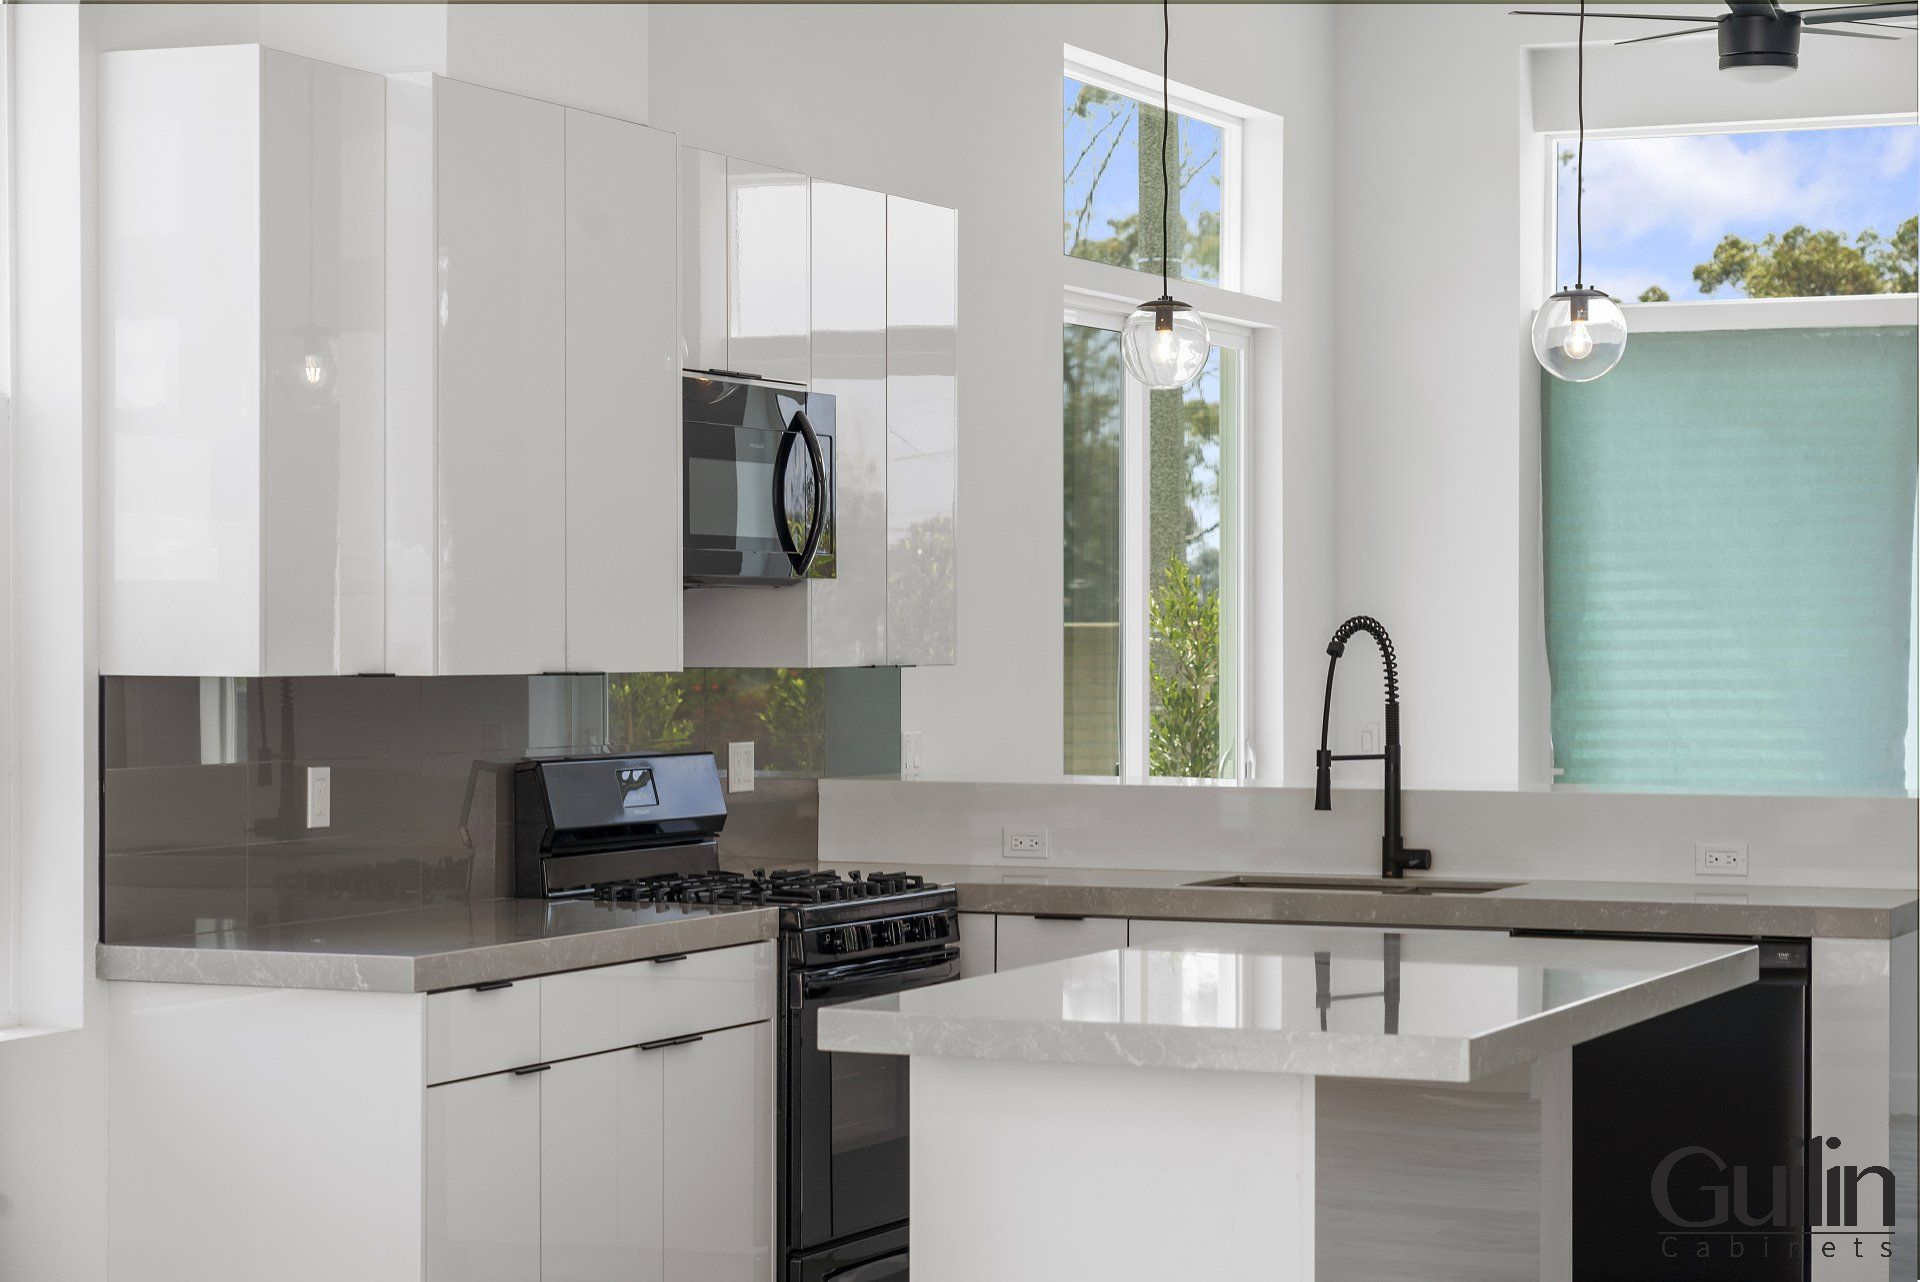 Modern kitchen style is focused on form and function with clean lines, minimalism, sleekness, simplicity, and neutral colors.